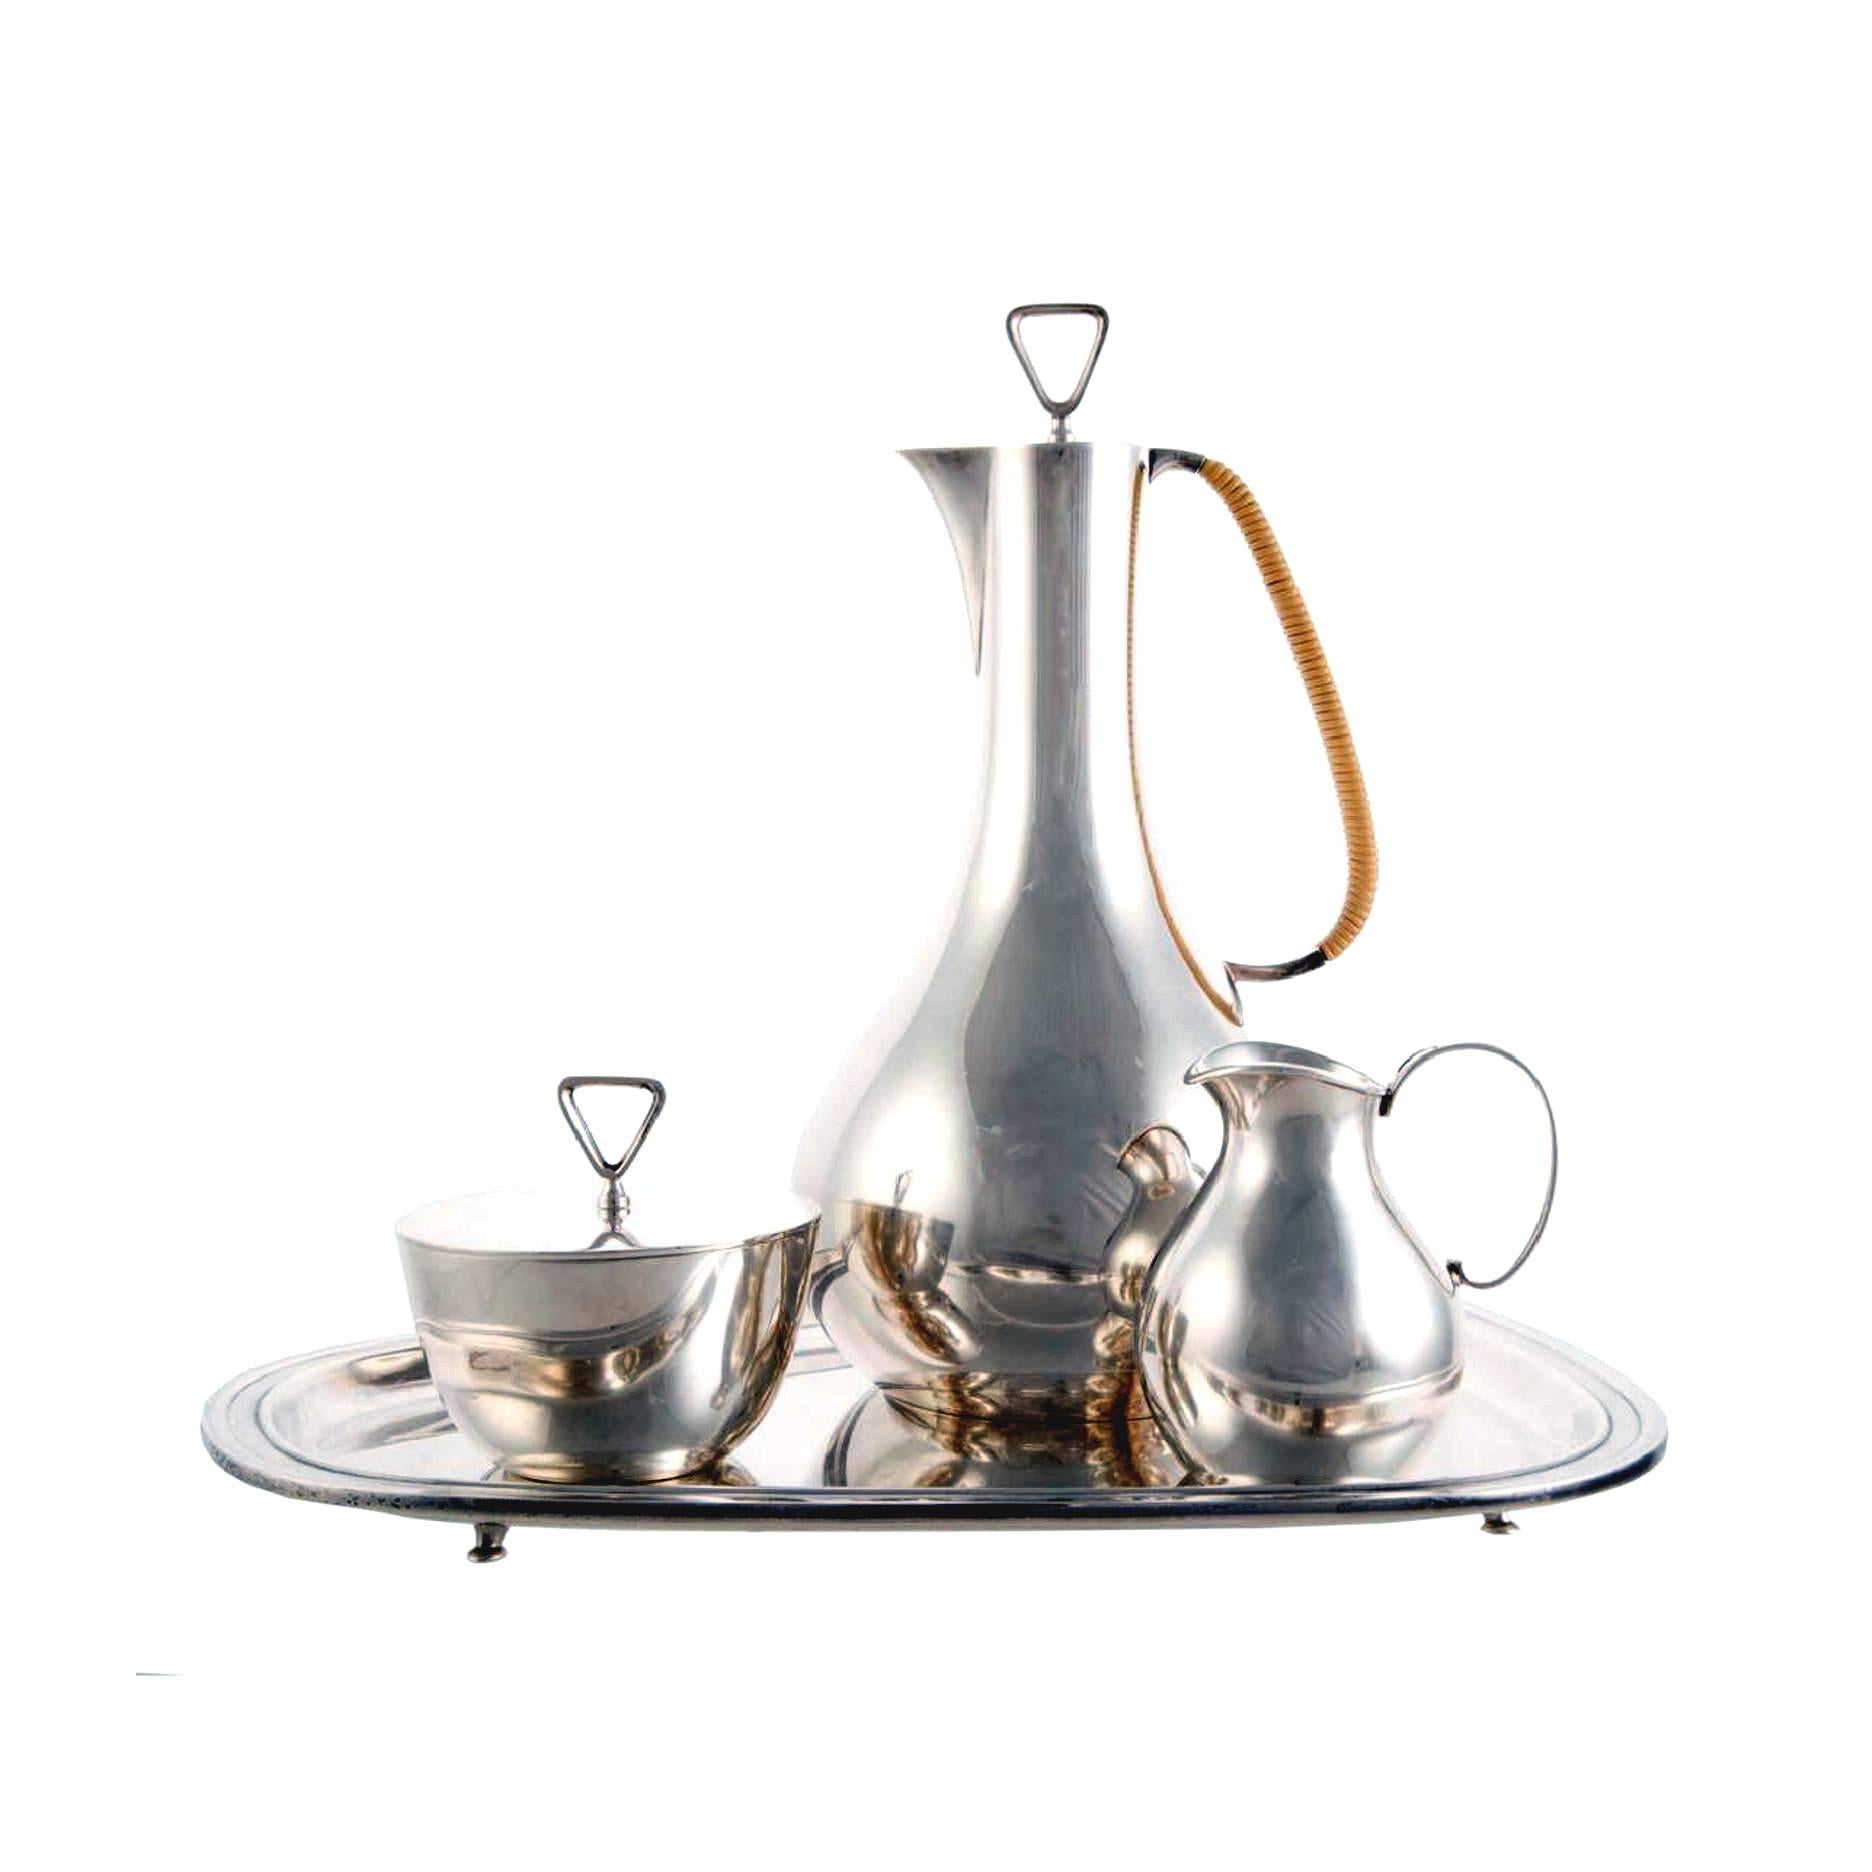 Rare Sterling Silver Coffee Service by Sigvard Bernadotte for Georg Jensen